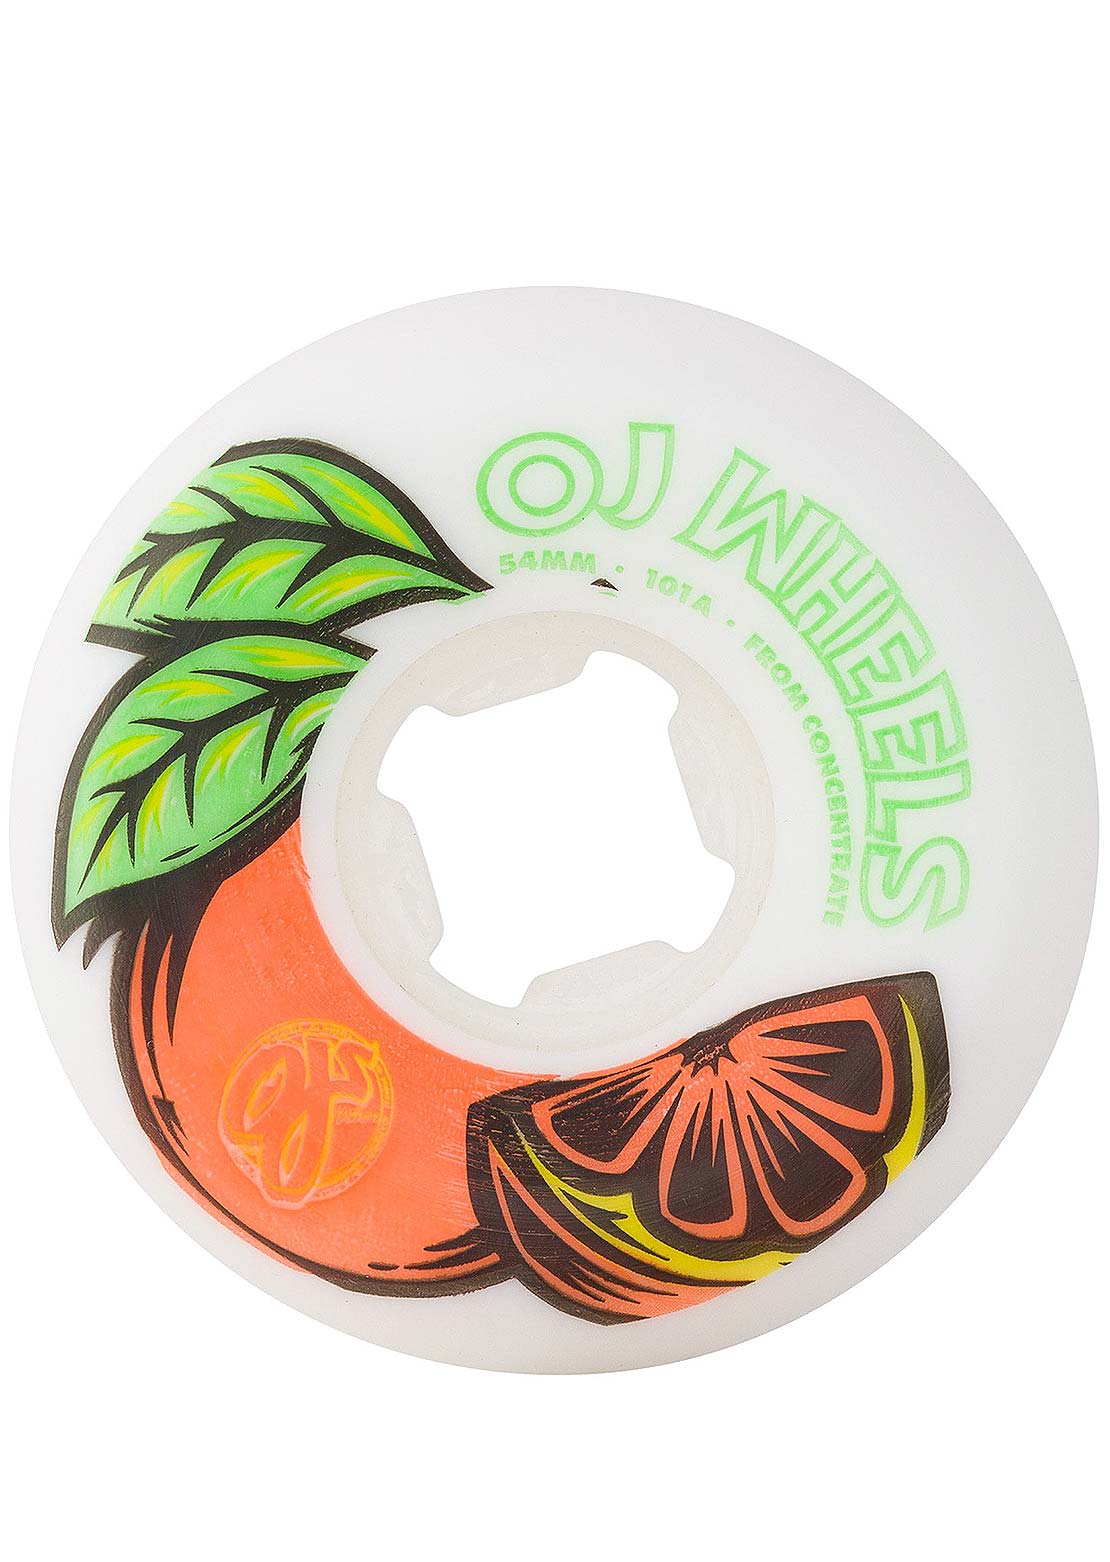 OJ Wheels From Concentrate 101A Skateboard Wheels 54 mm White